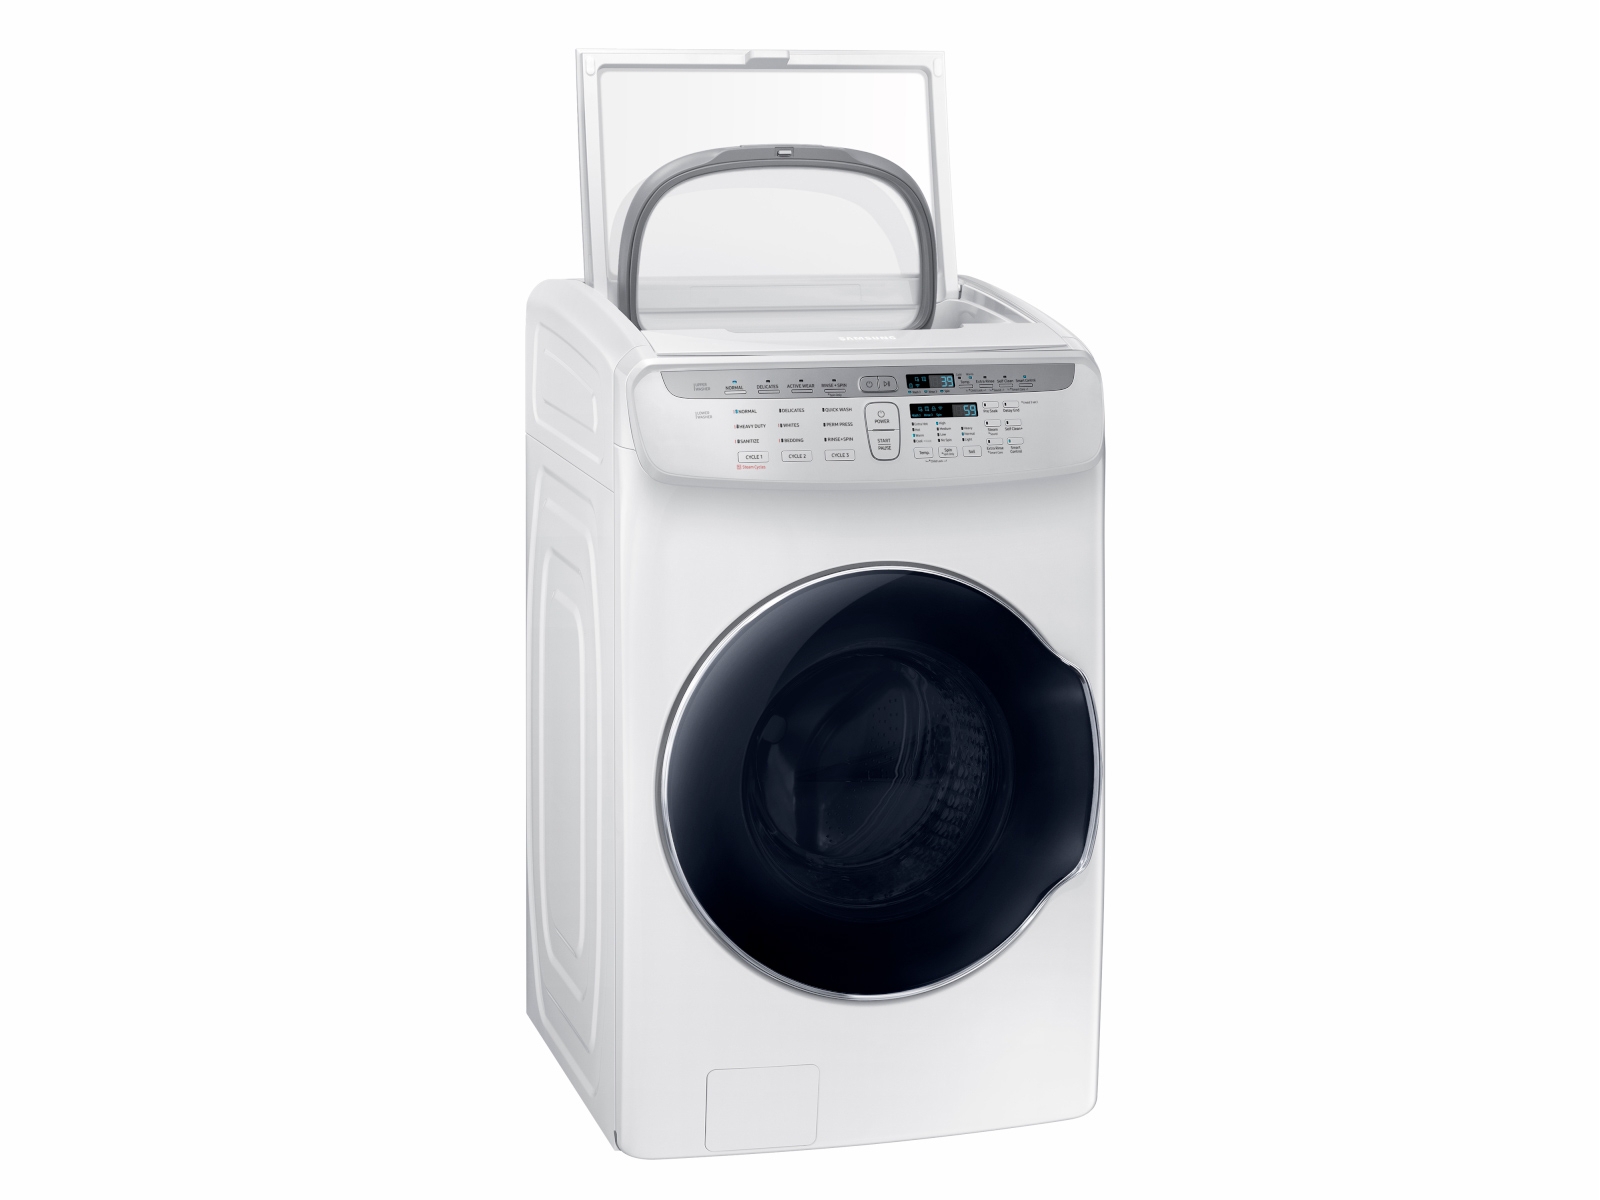 https://image-us.samsung.com/SamsungUS/home/home-appliances/washers/2-in-1/pd/wv55m9600aw/gallery/11_Washer-FlexWash_WV55M9600AW_R-Perspective-Open_White.jpg?$product-details-jpg$